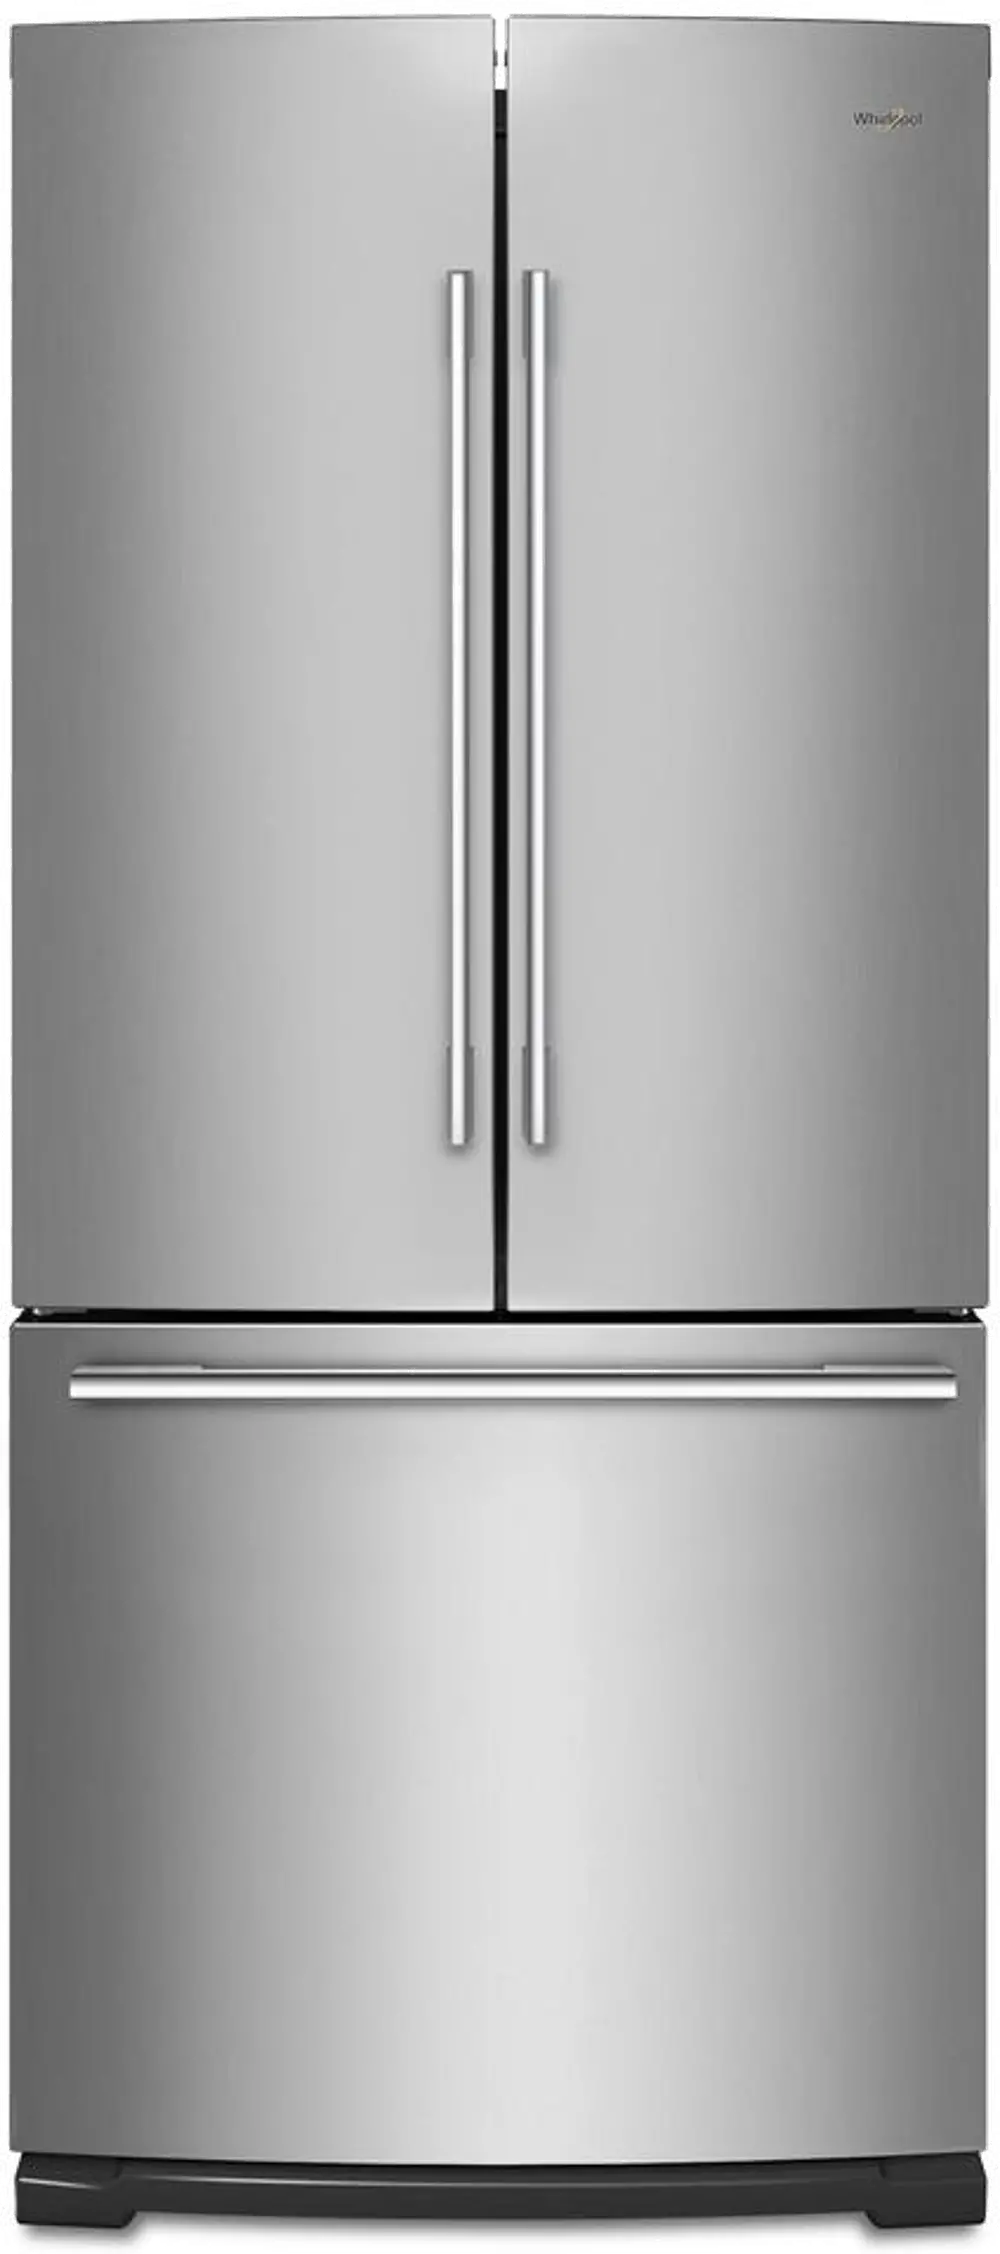 WRFA60SMHZ Whirlpool French Door Refrigerator - 30 Inch Stainless Steel-1